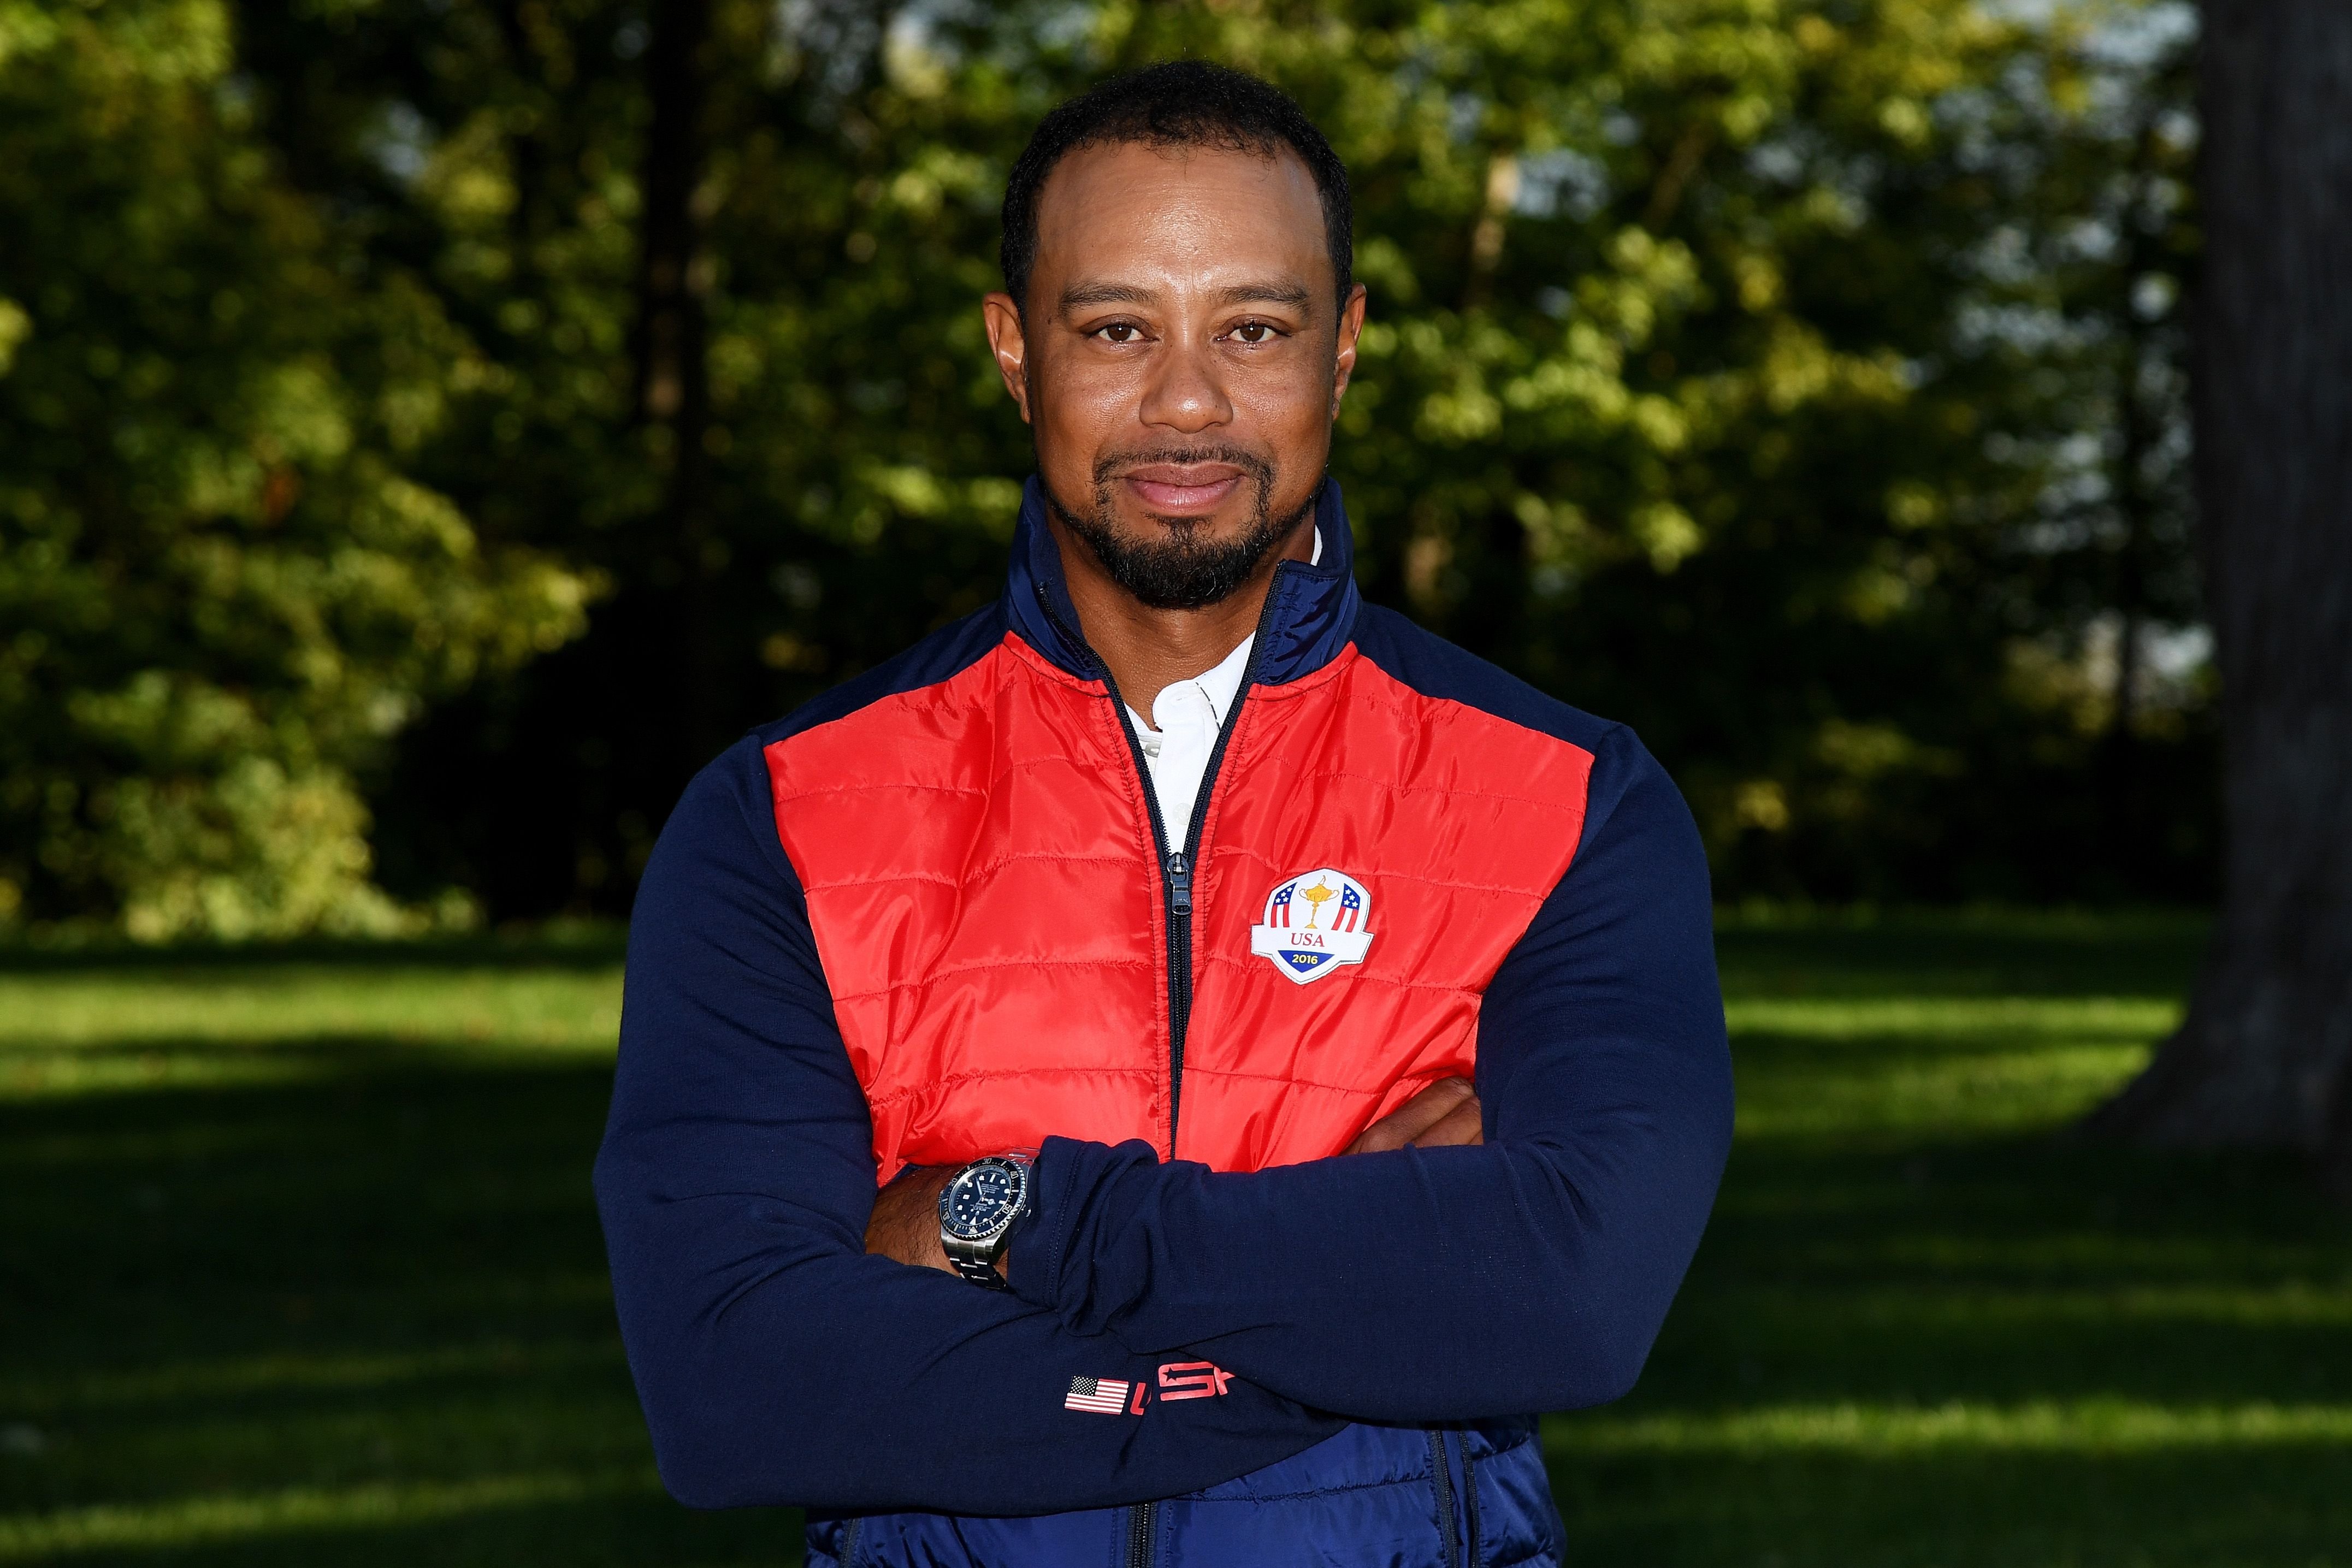 Vice-captain Tiger Woods of the US poses during team photocalls prior to the Ryder Cup on September 27, 2016, in Chaska, Minnesota | Photo: Ross Kinnaird/Getty Images